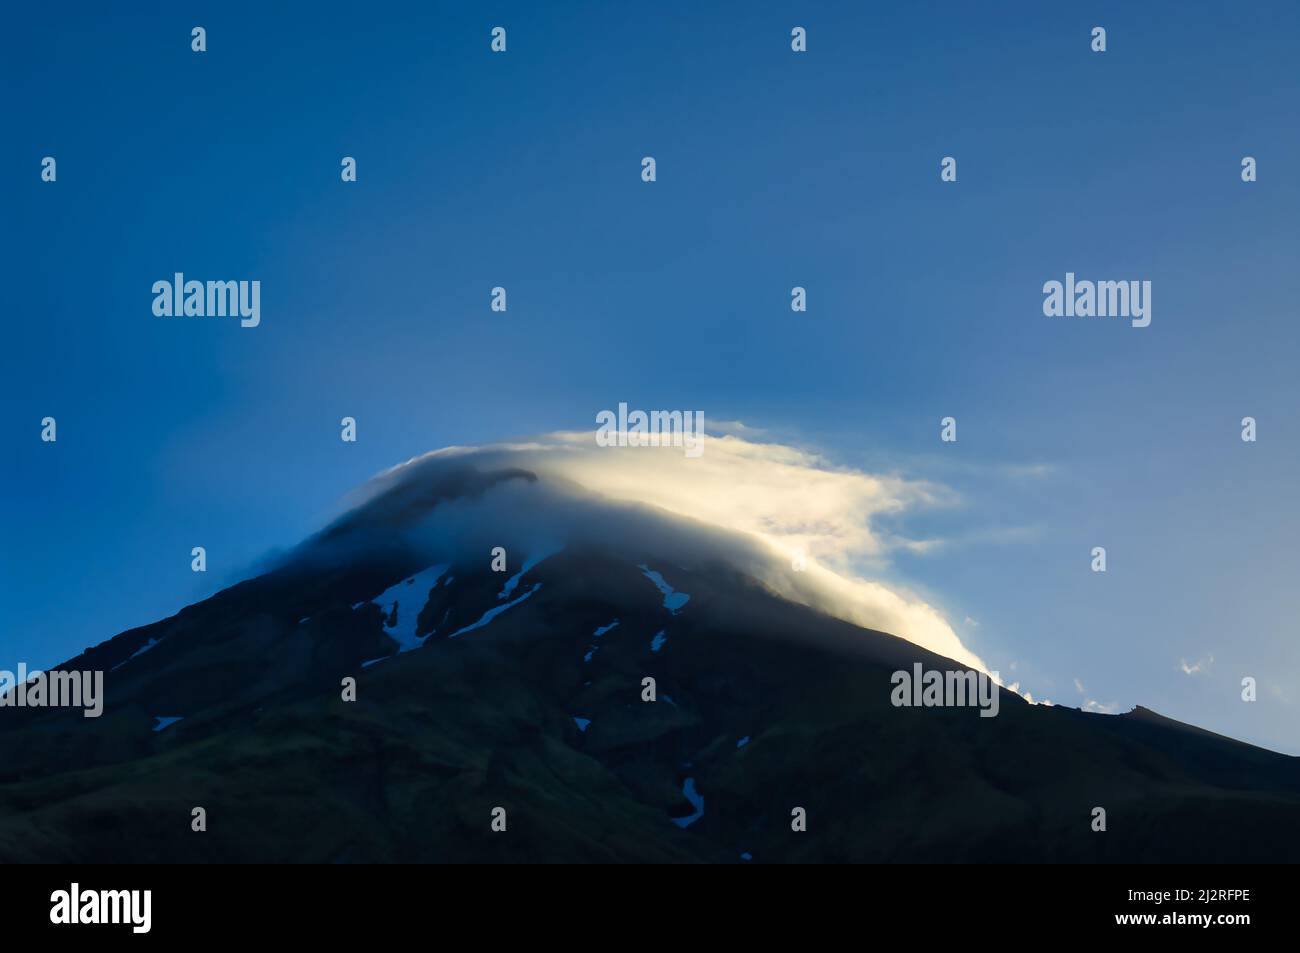 Volcano with snowfields and clouds around the summit, lit by the evening sun. Mount Taranaki (Mount Egmont), North Island, New Zealand. Stock Photo